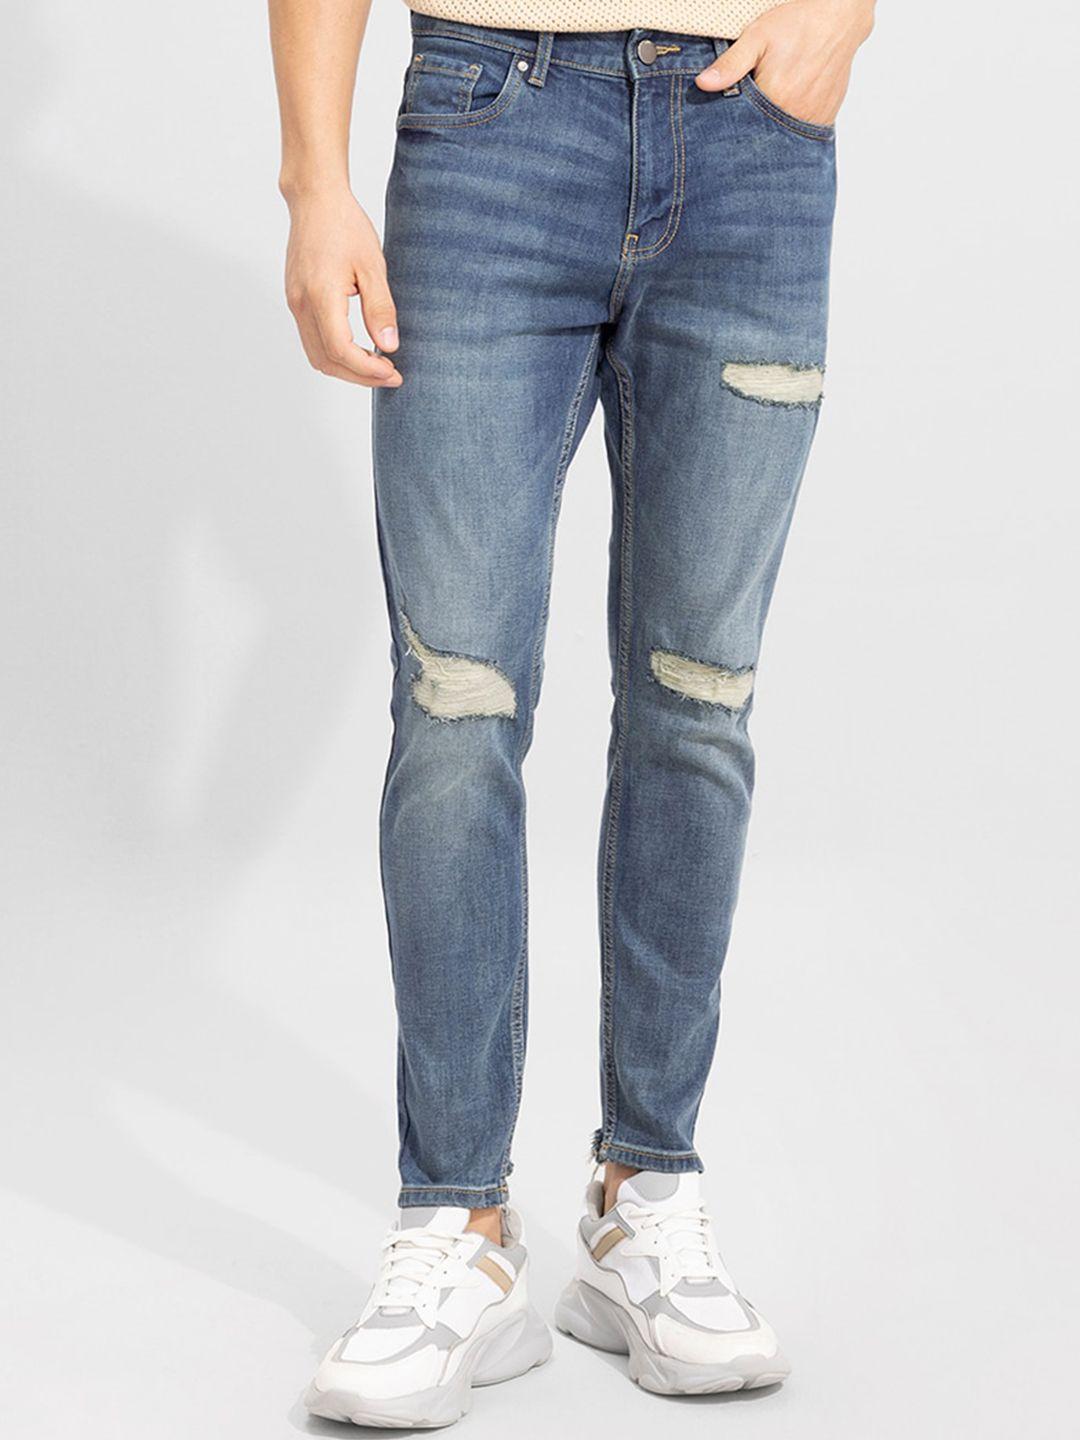 snitch-men-blue-skinny-fit-low-rise-mildly-distressed-light-fade-stretchable-jeans